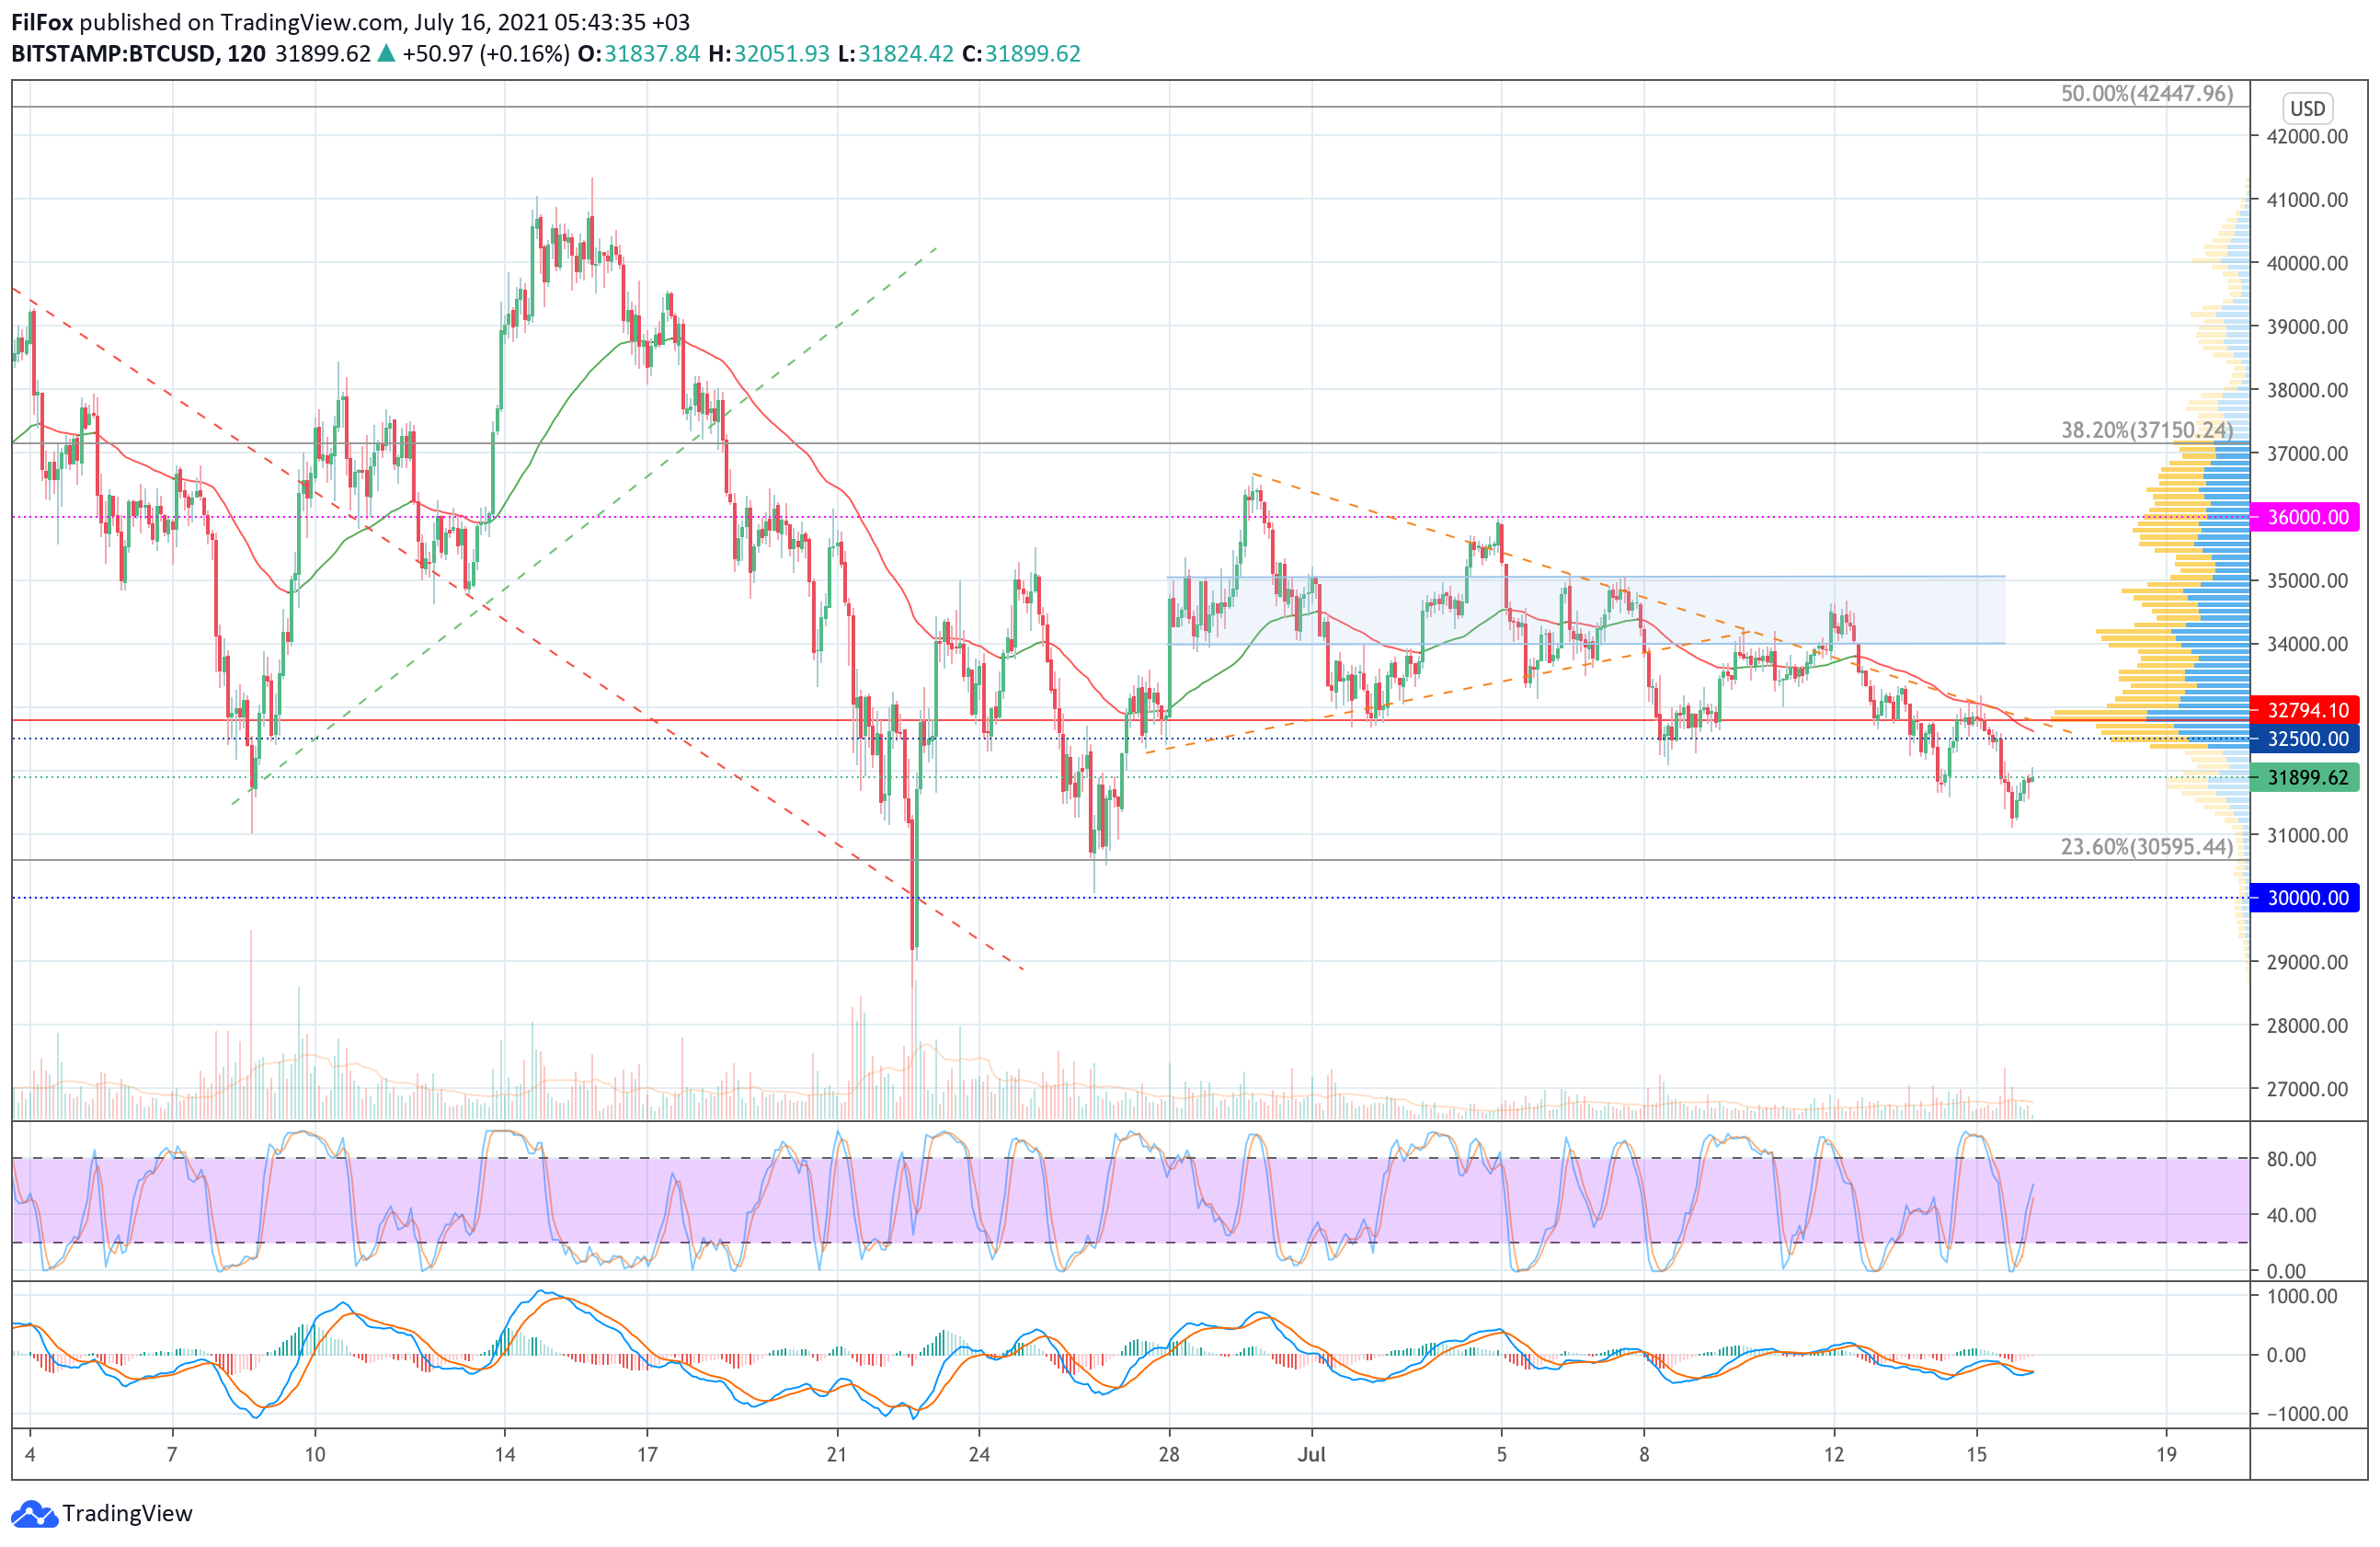 Analysis of the prices of Bitcoin, Ethereum, XRP for 07/16/2021